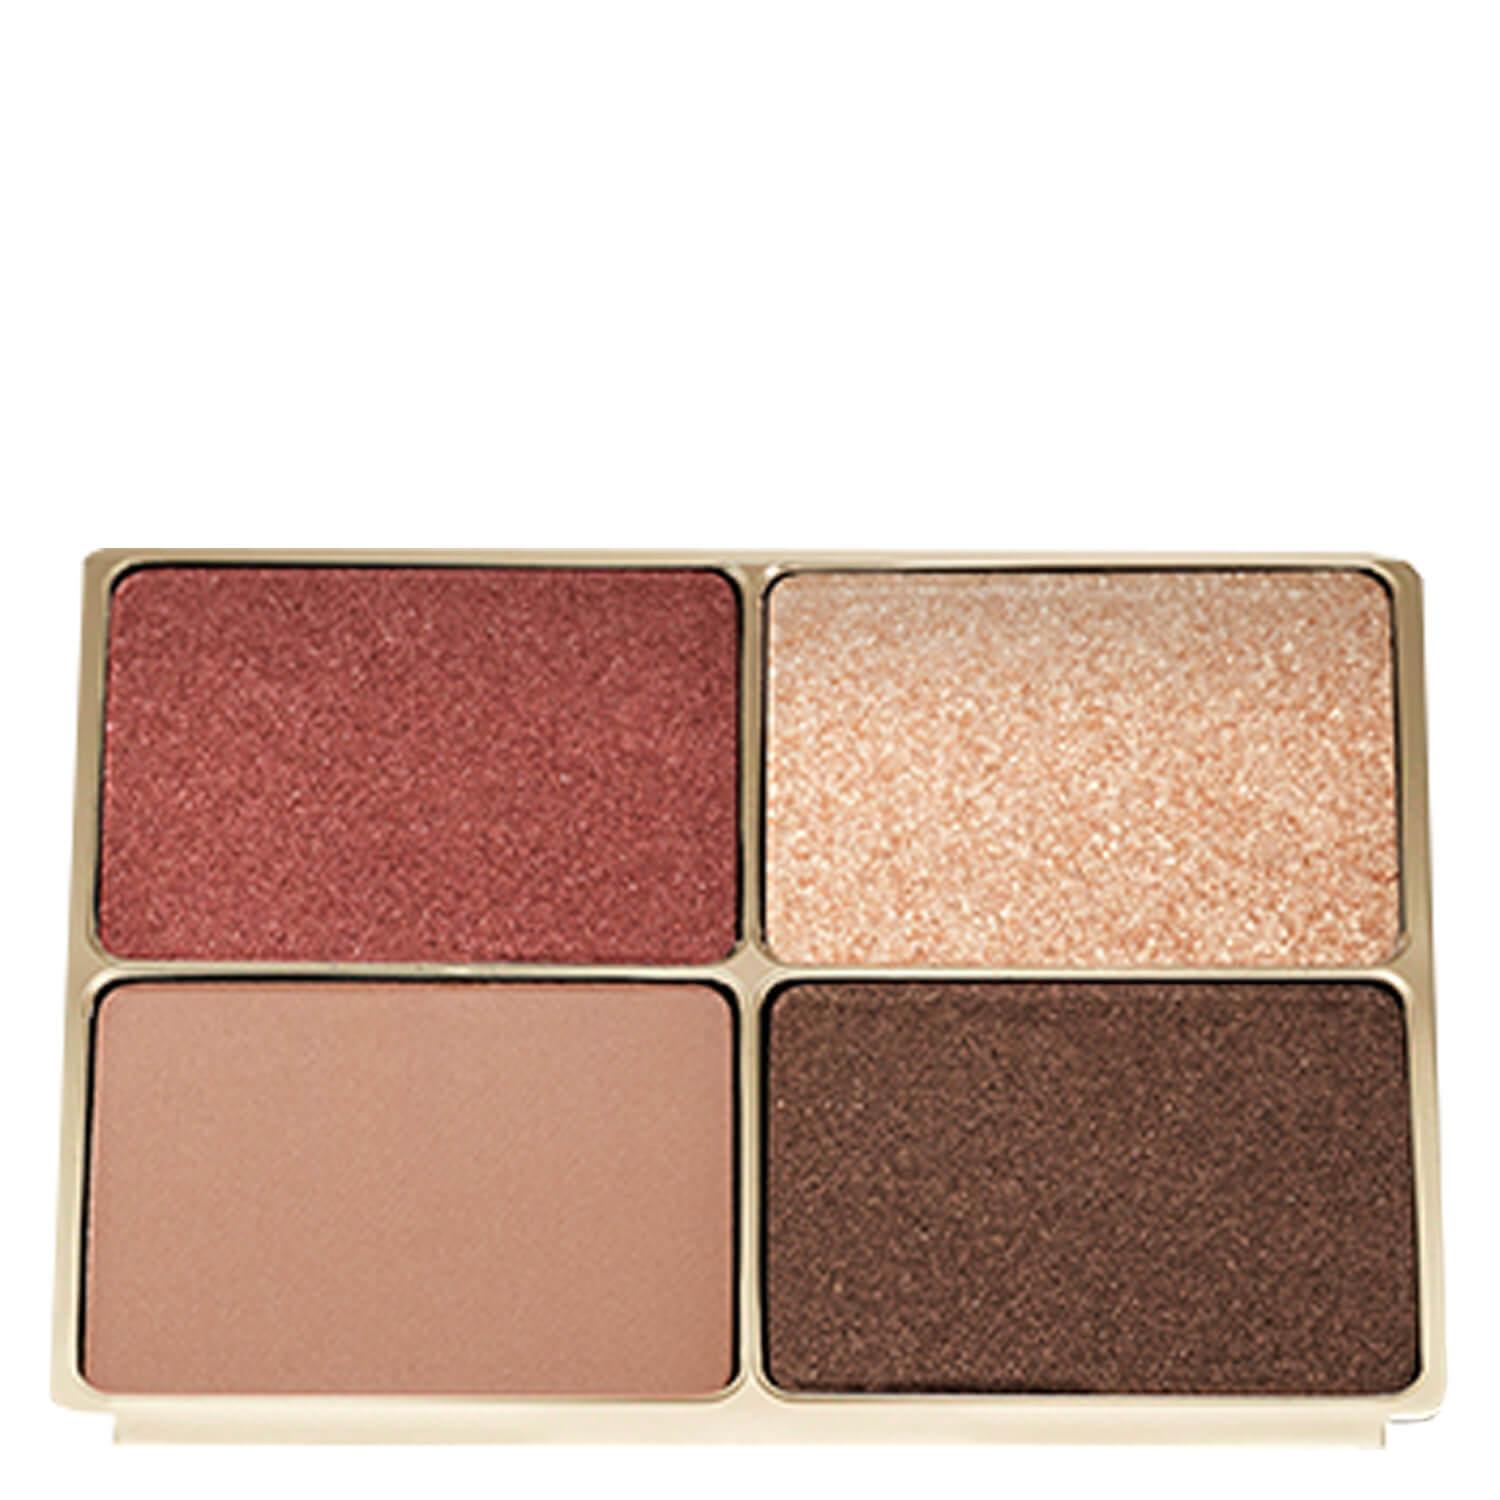 Pure Color Envy - Luxe EyeShadow Quad Boho Rose 07 Refill